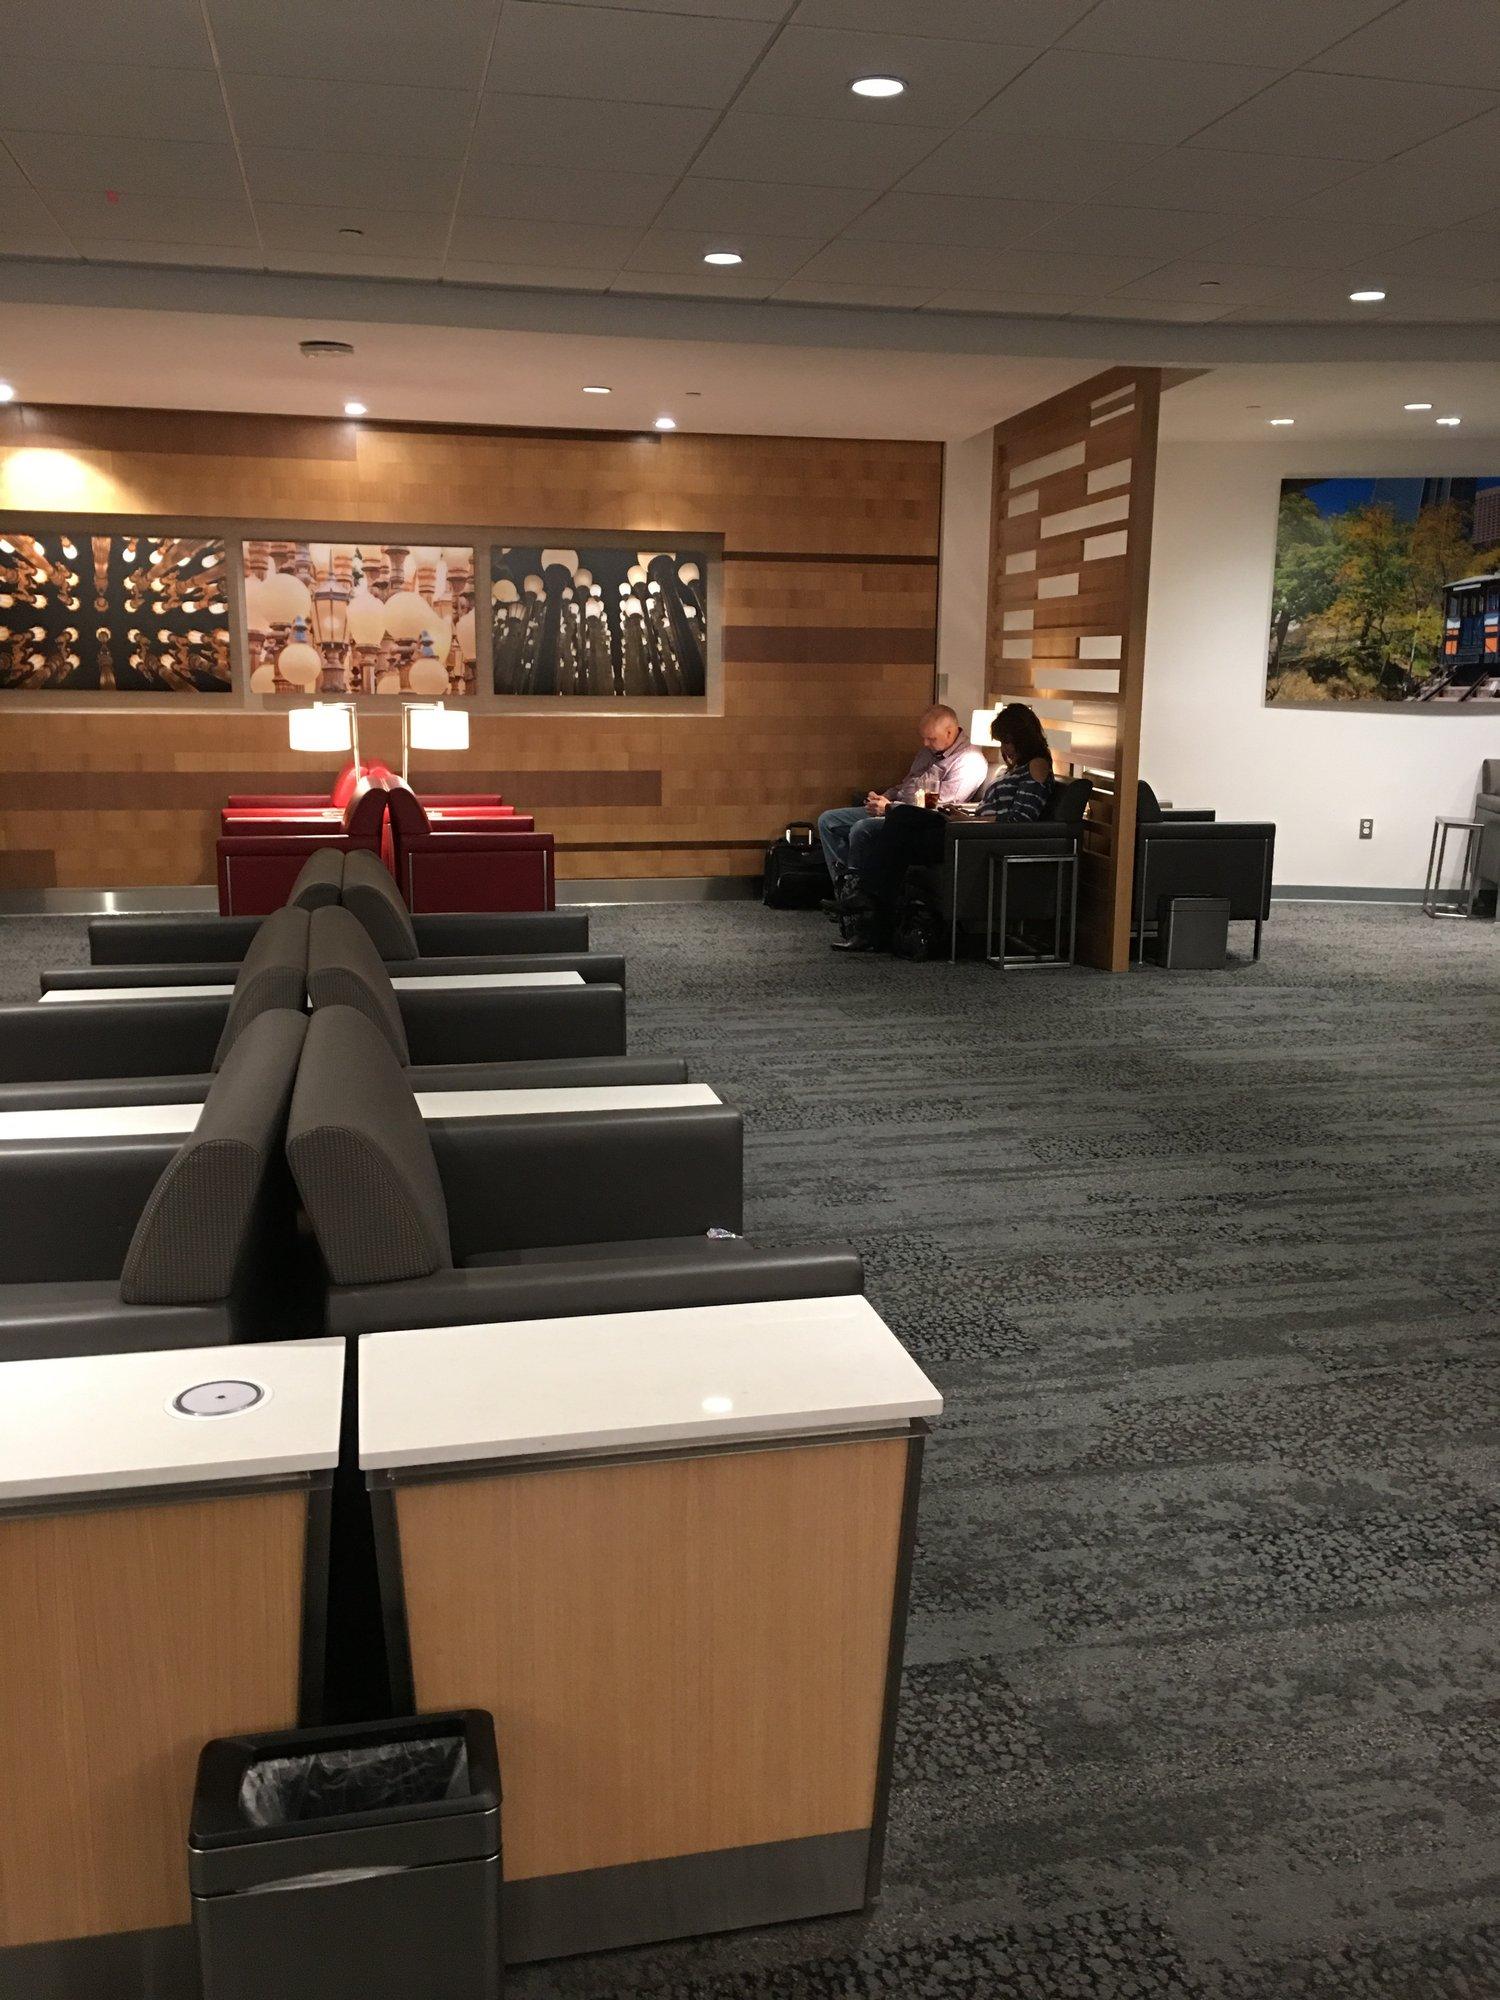 American Airlines Admirals Club image 27 of 38